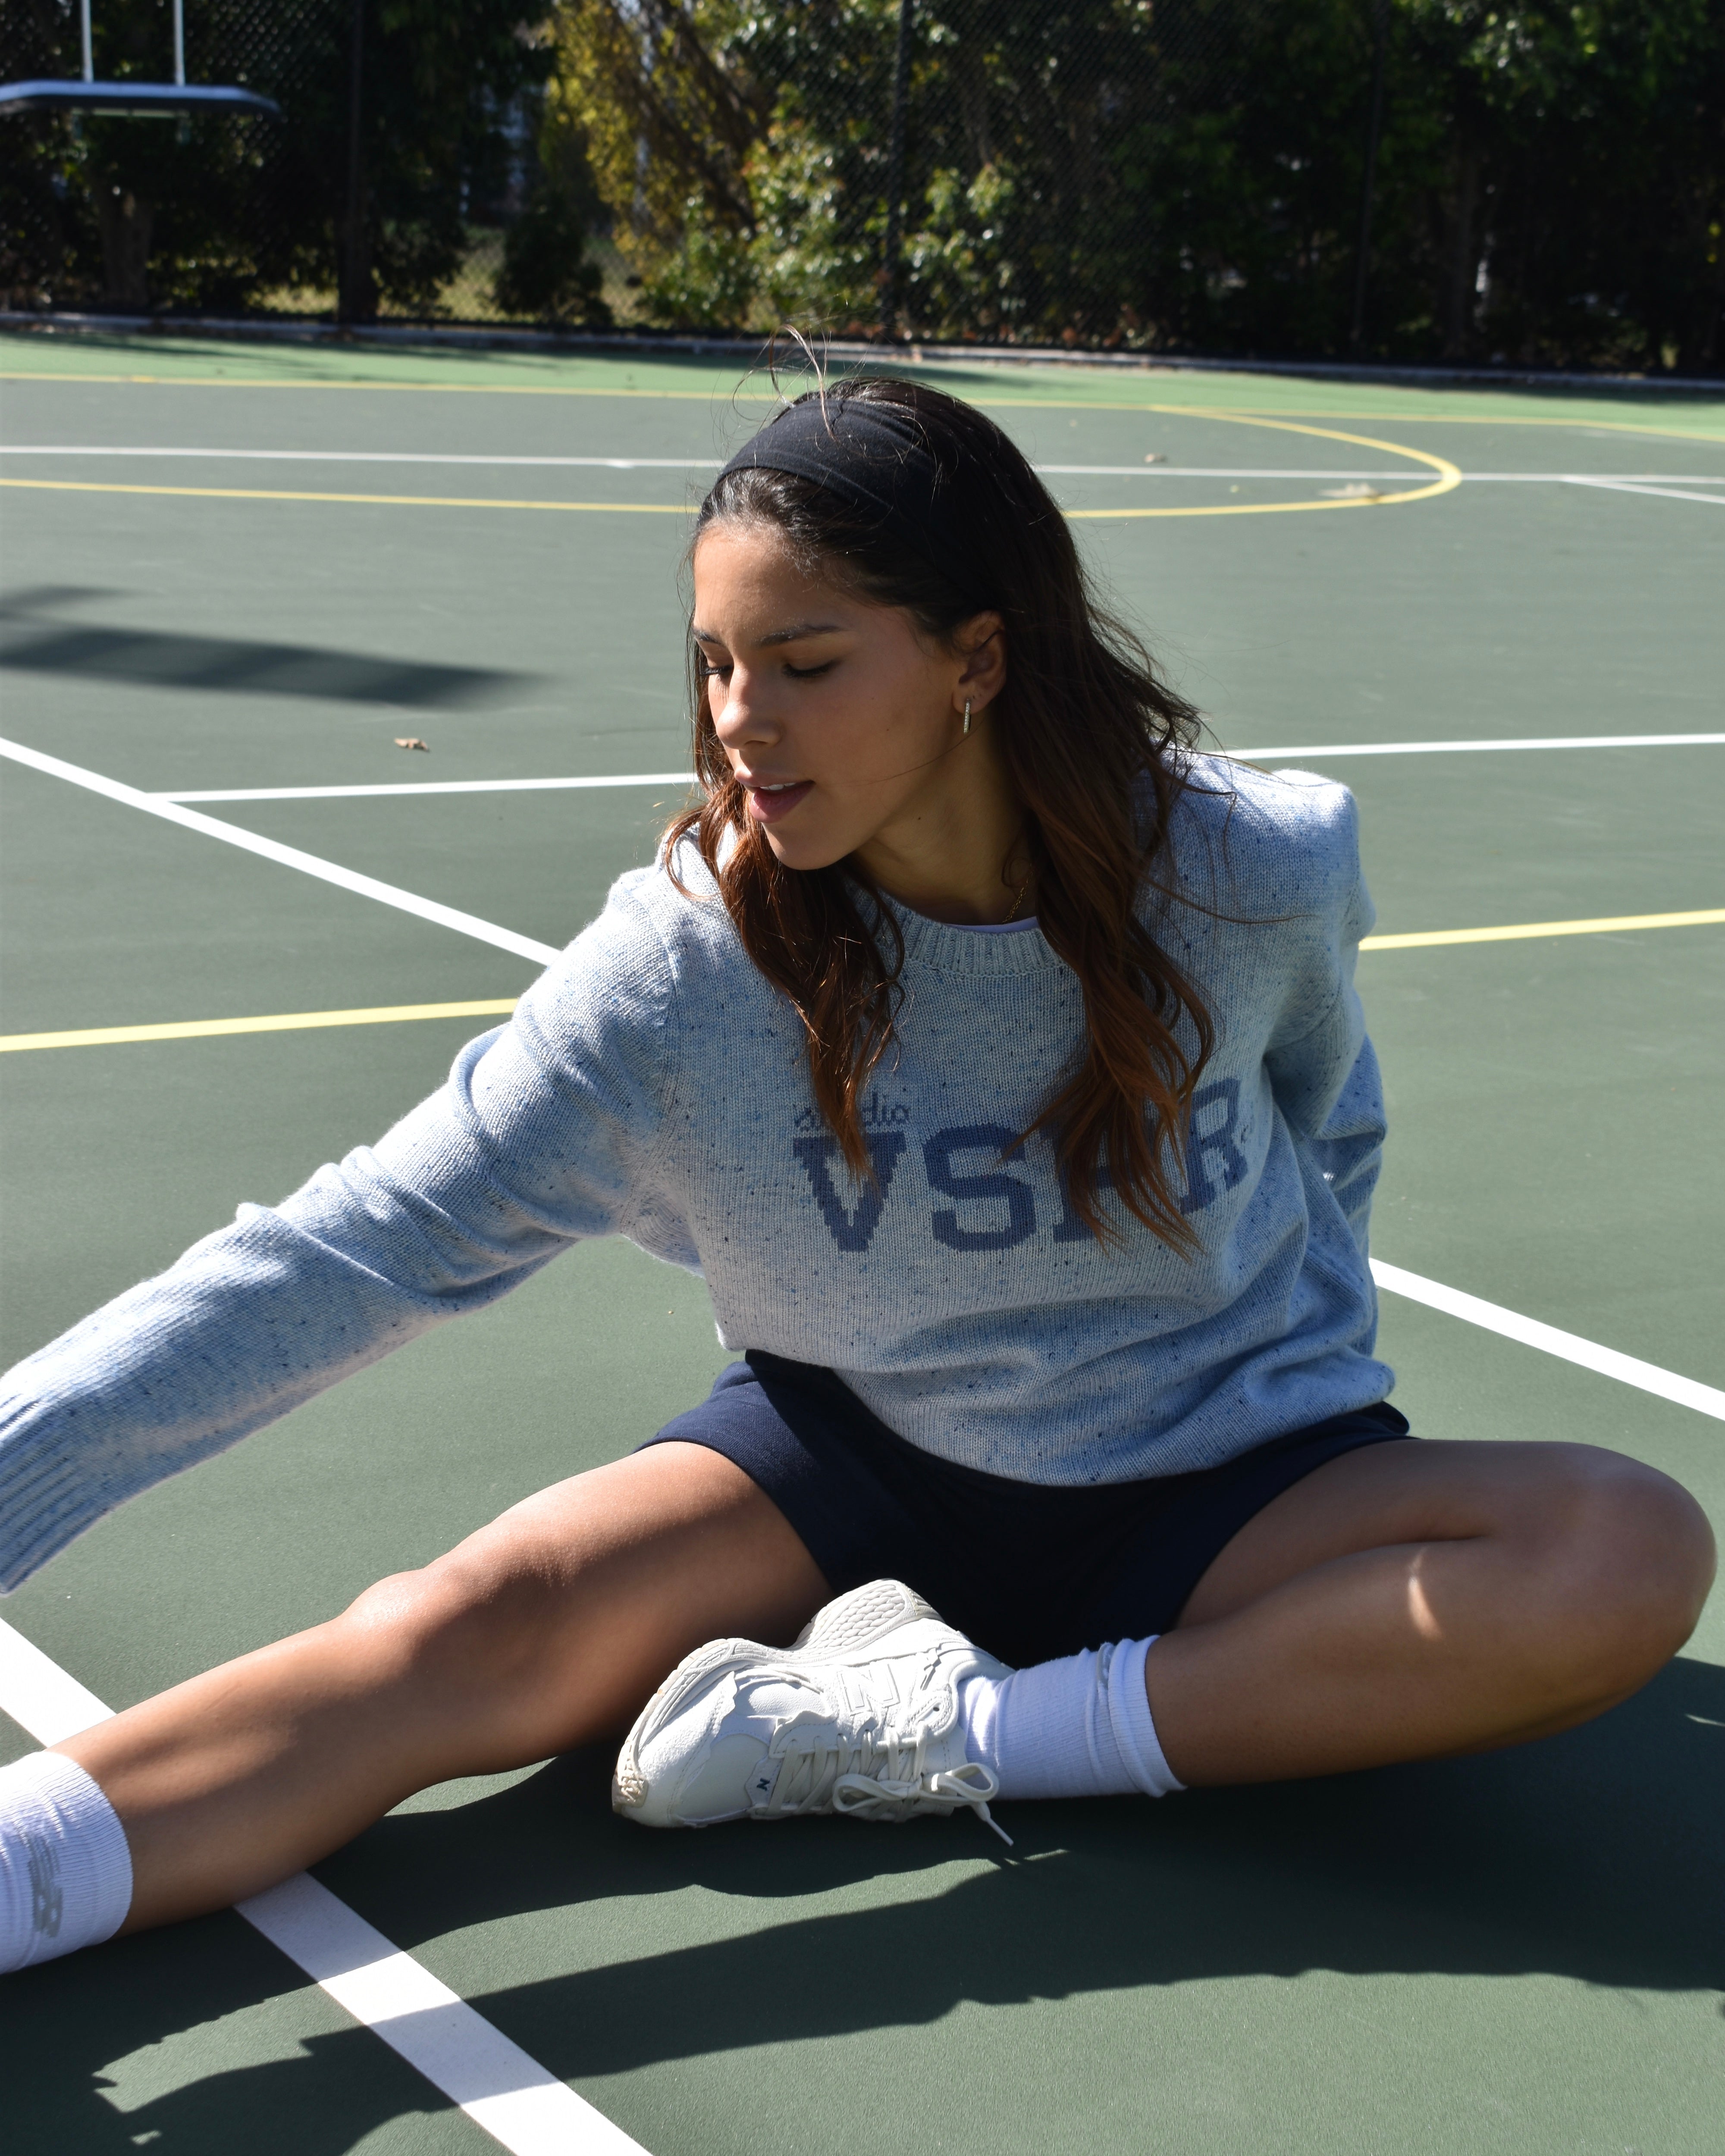 The Baby Blue College Knit